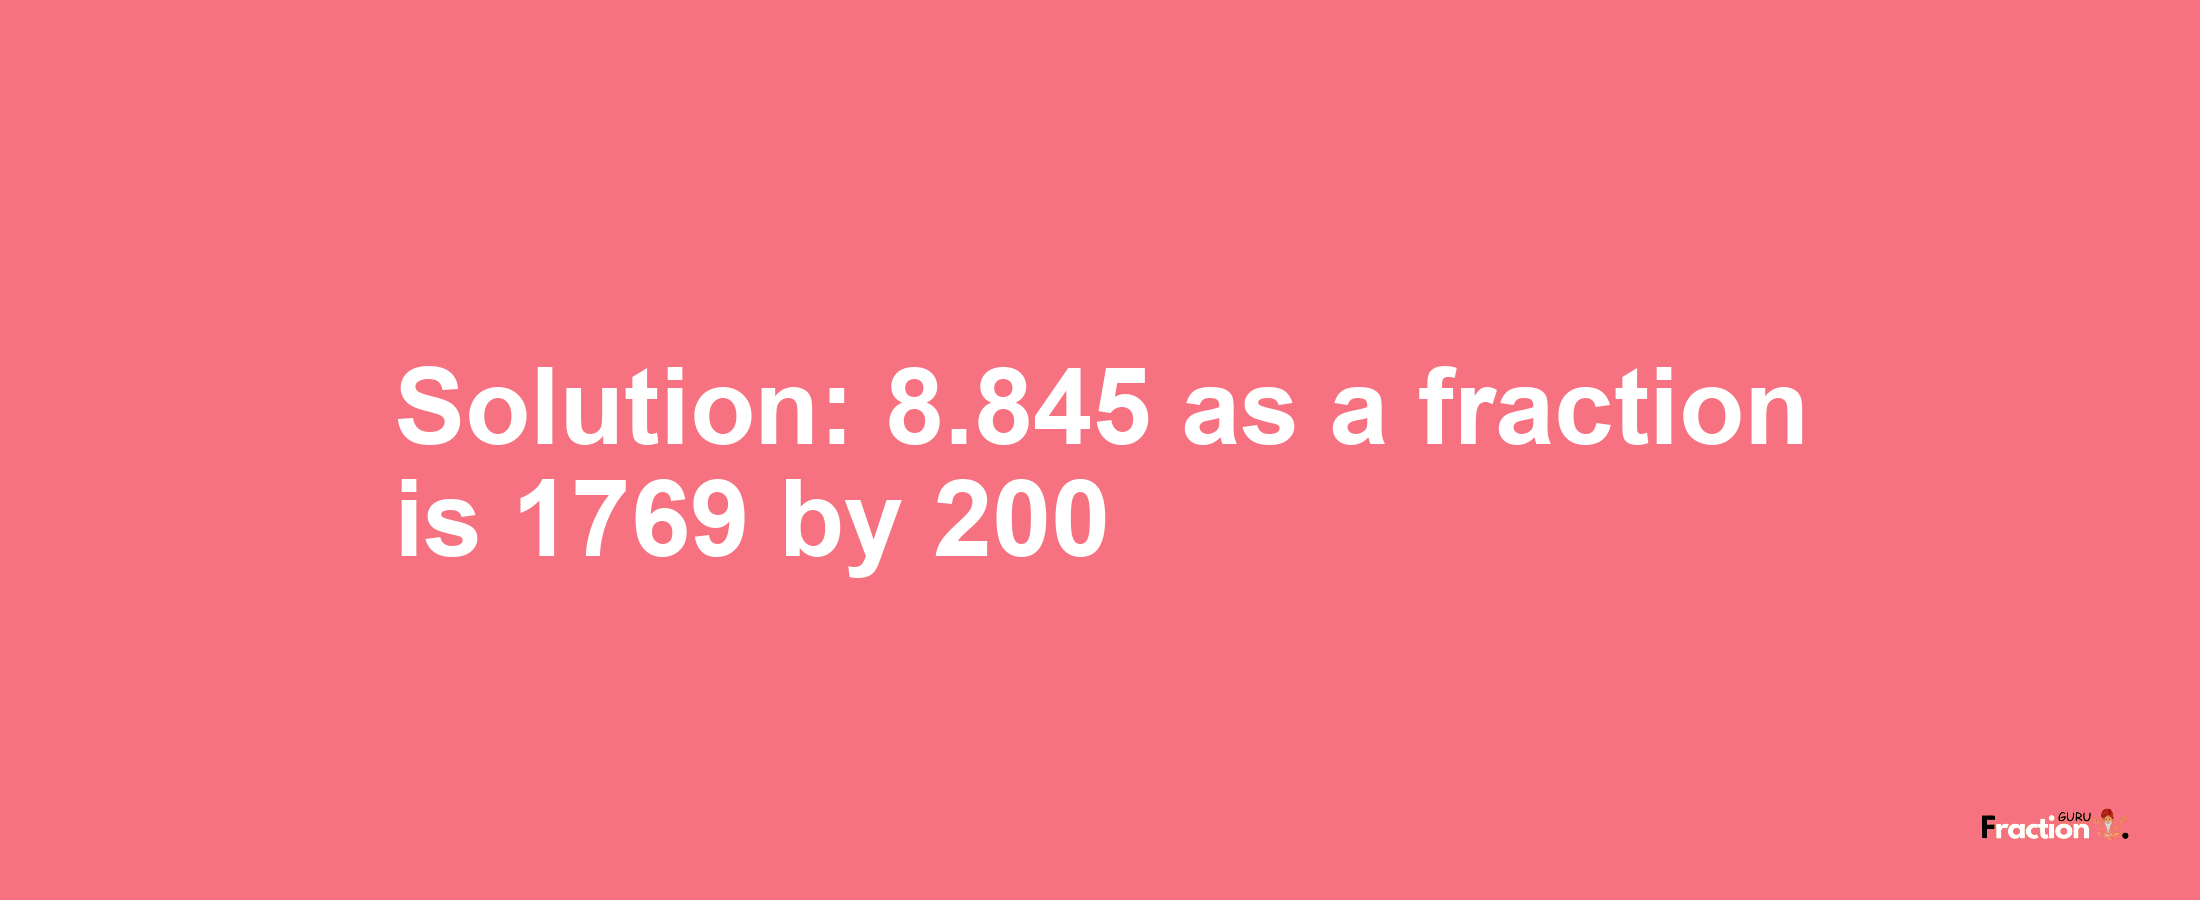 Solution:8.845 as a fraction is 1769/200